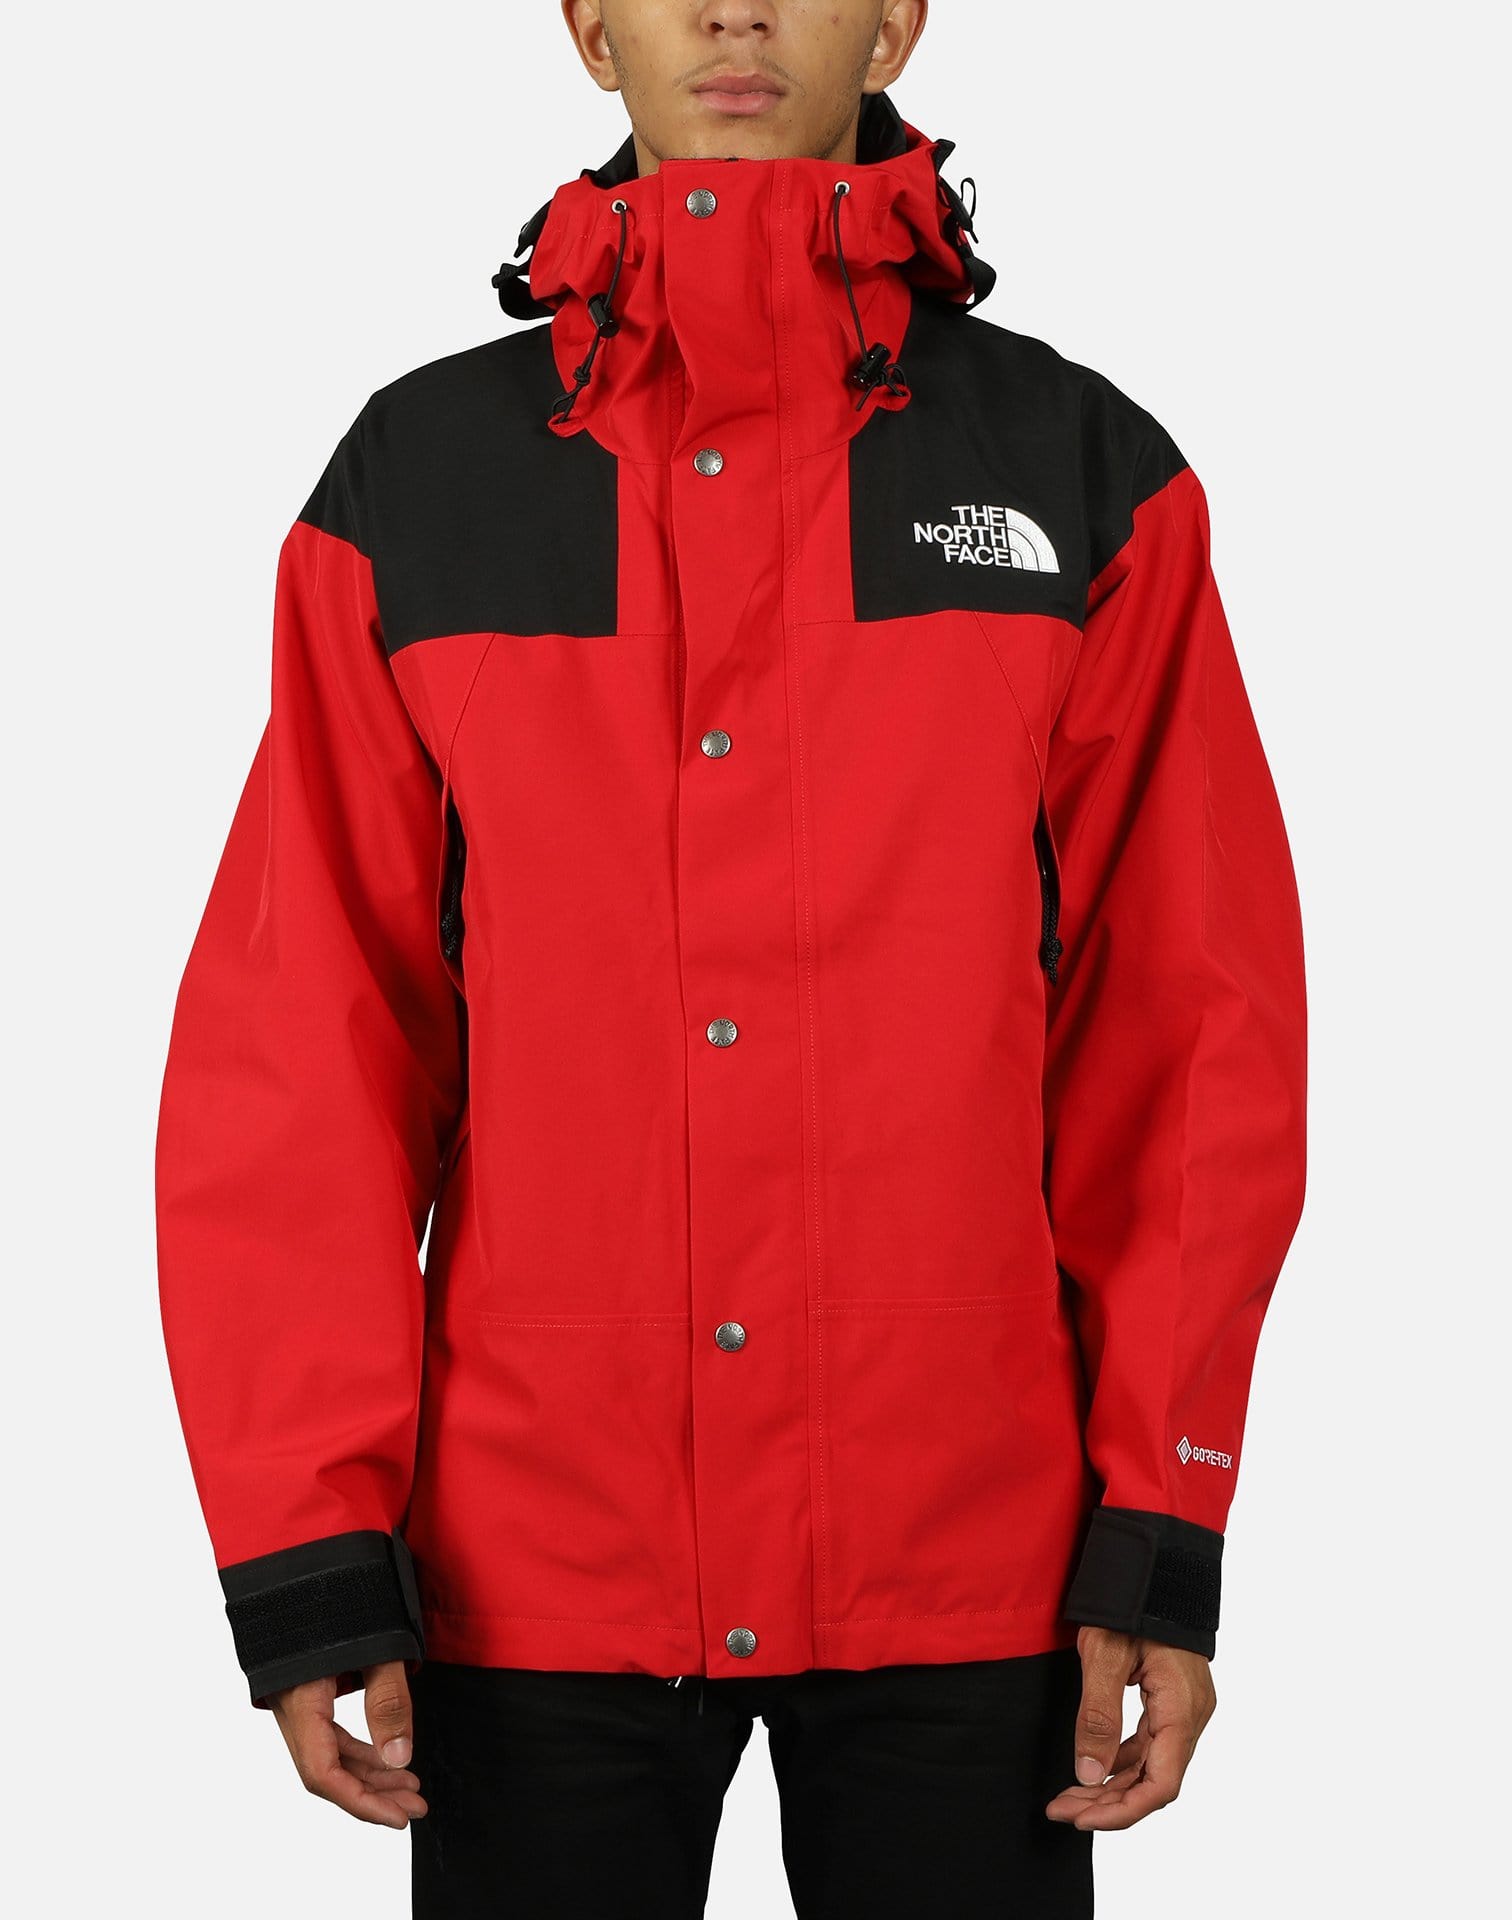 The North Face 1990 MOUNTAIN JACKET GTX – DTLR